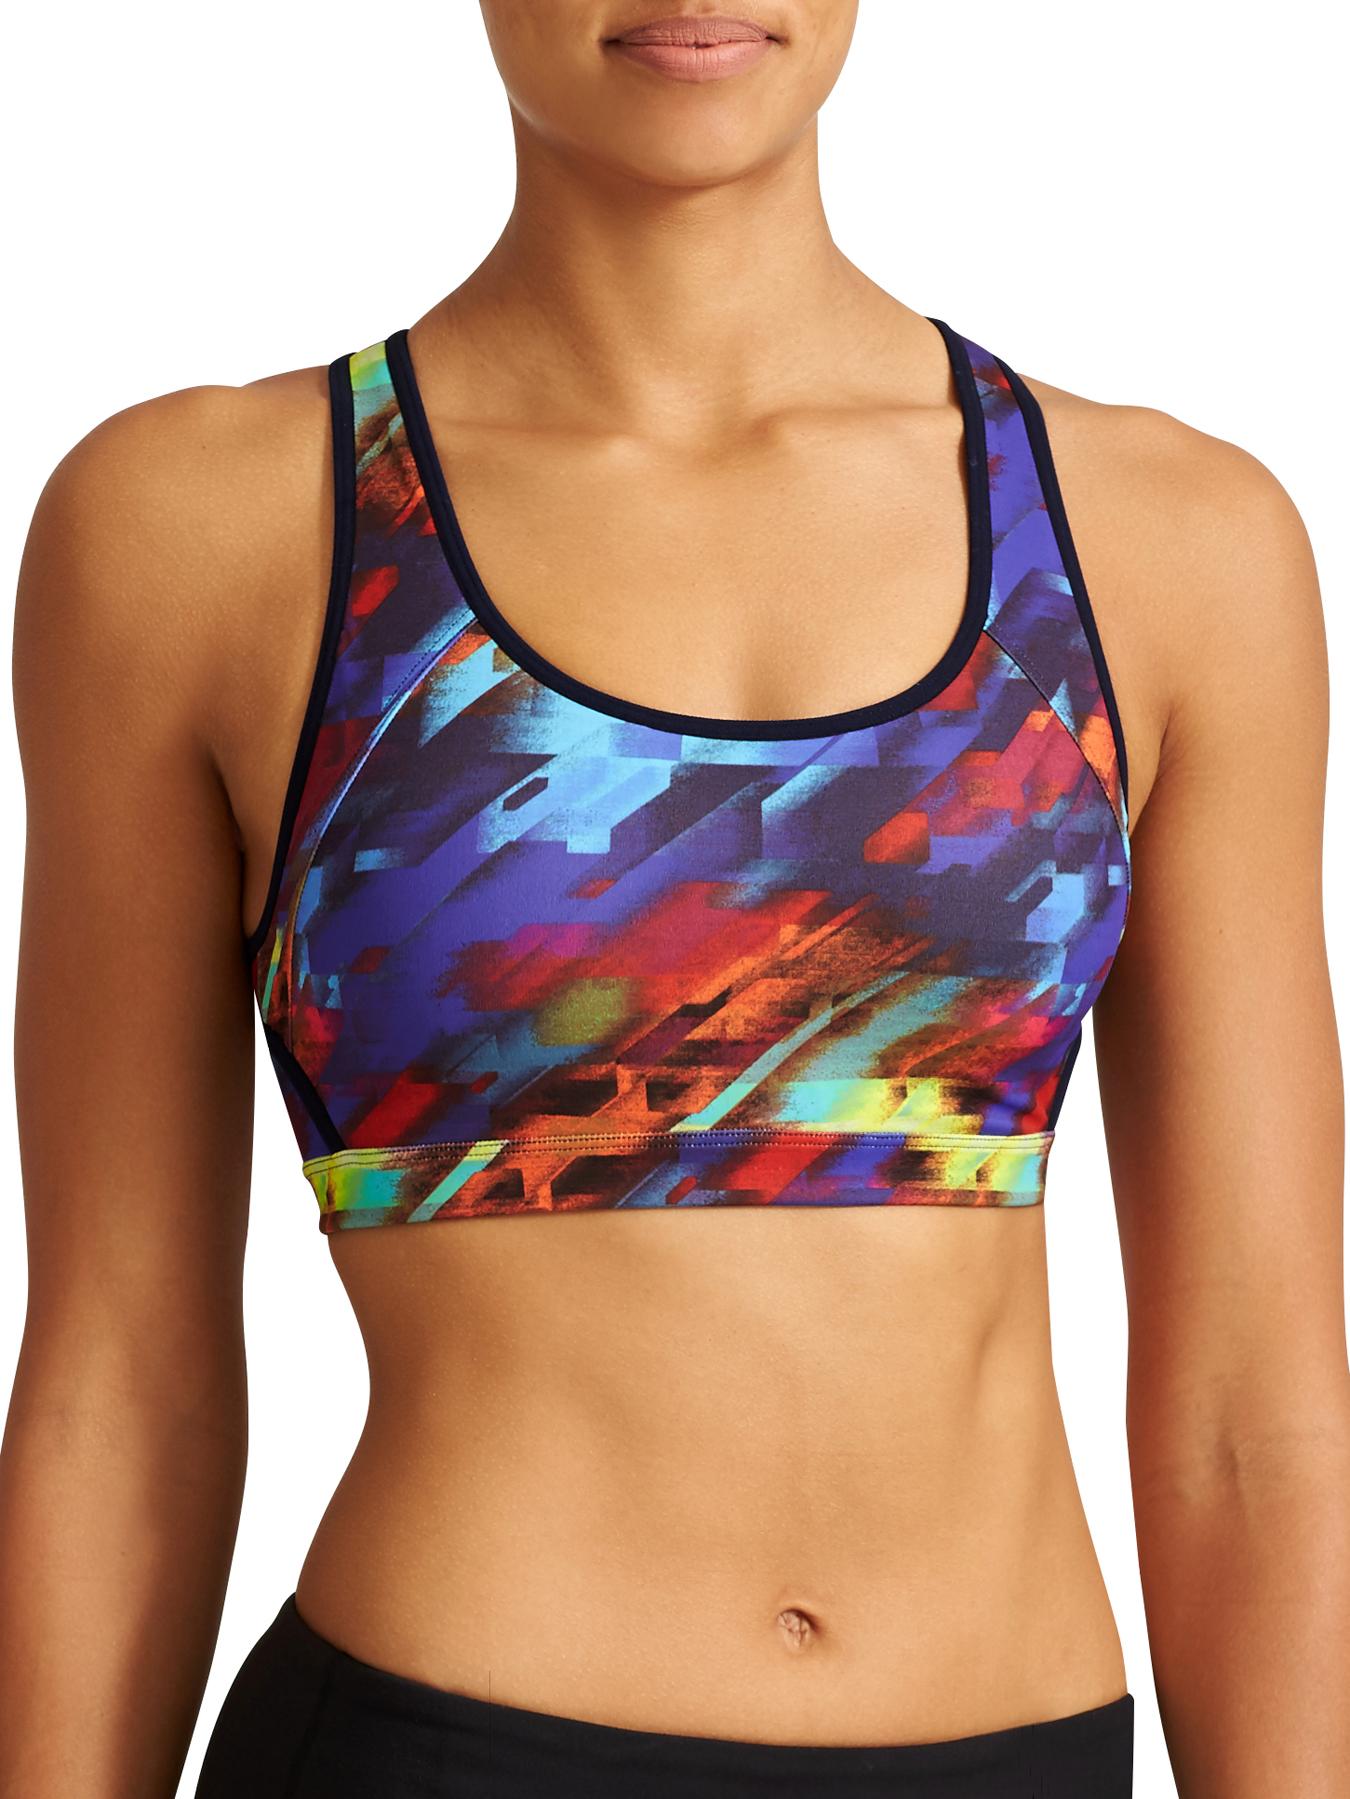 Athleta Double Dare Sports Bra size large - $22 - From Jean